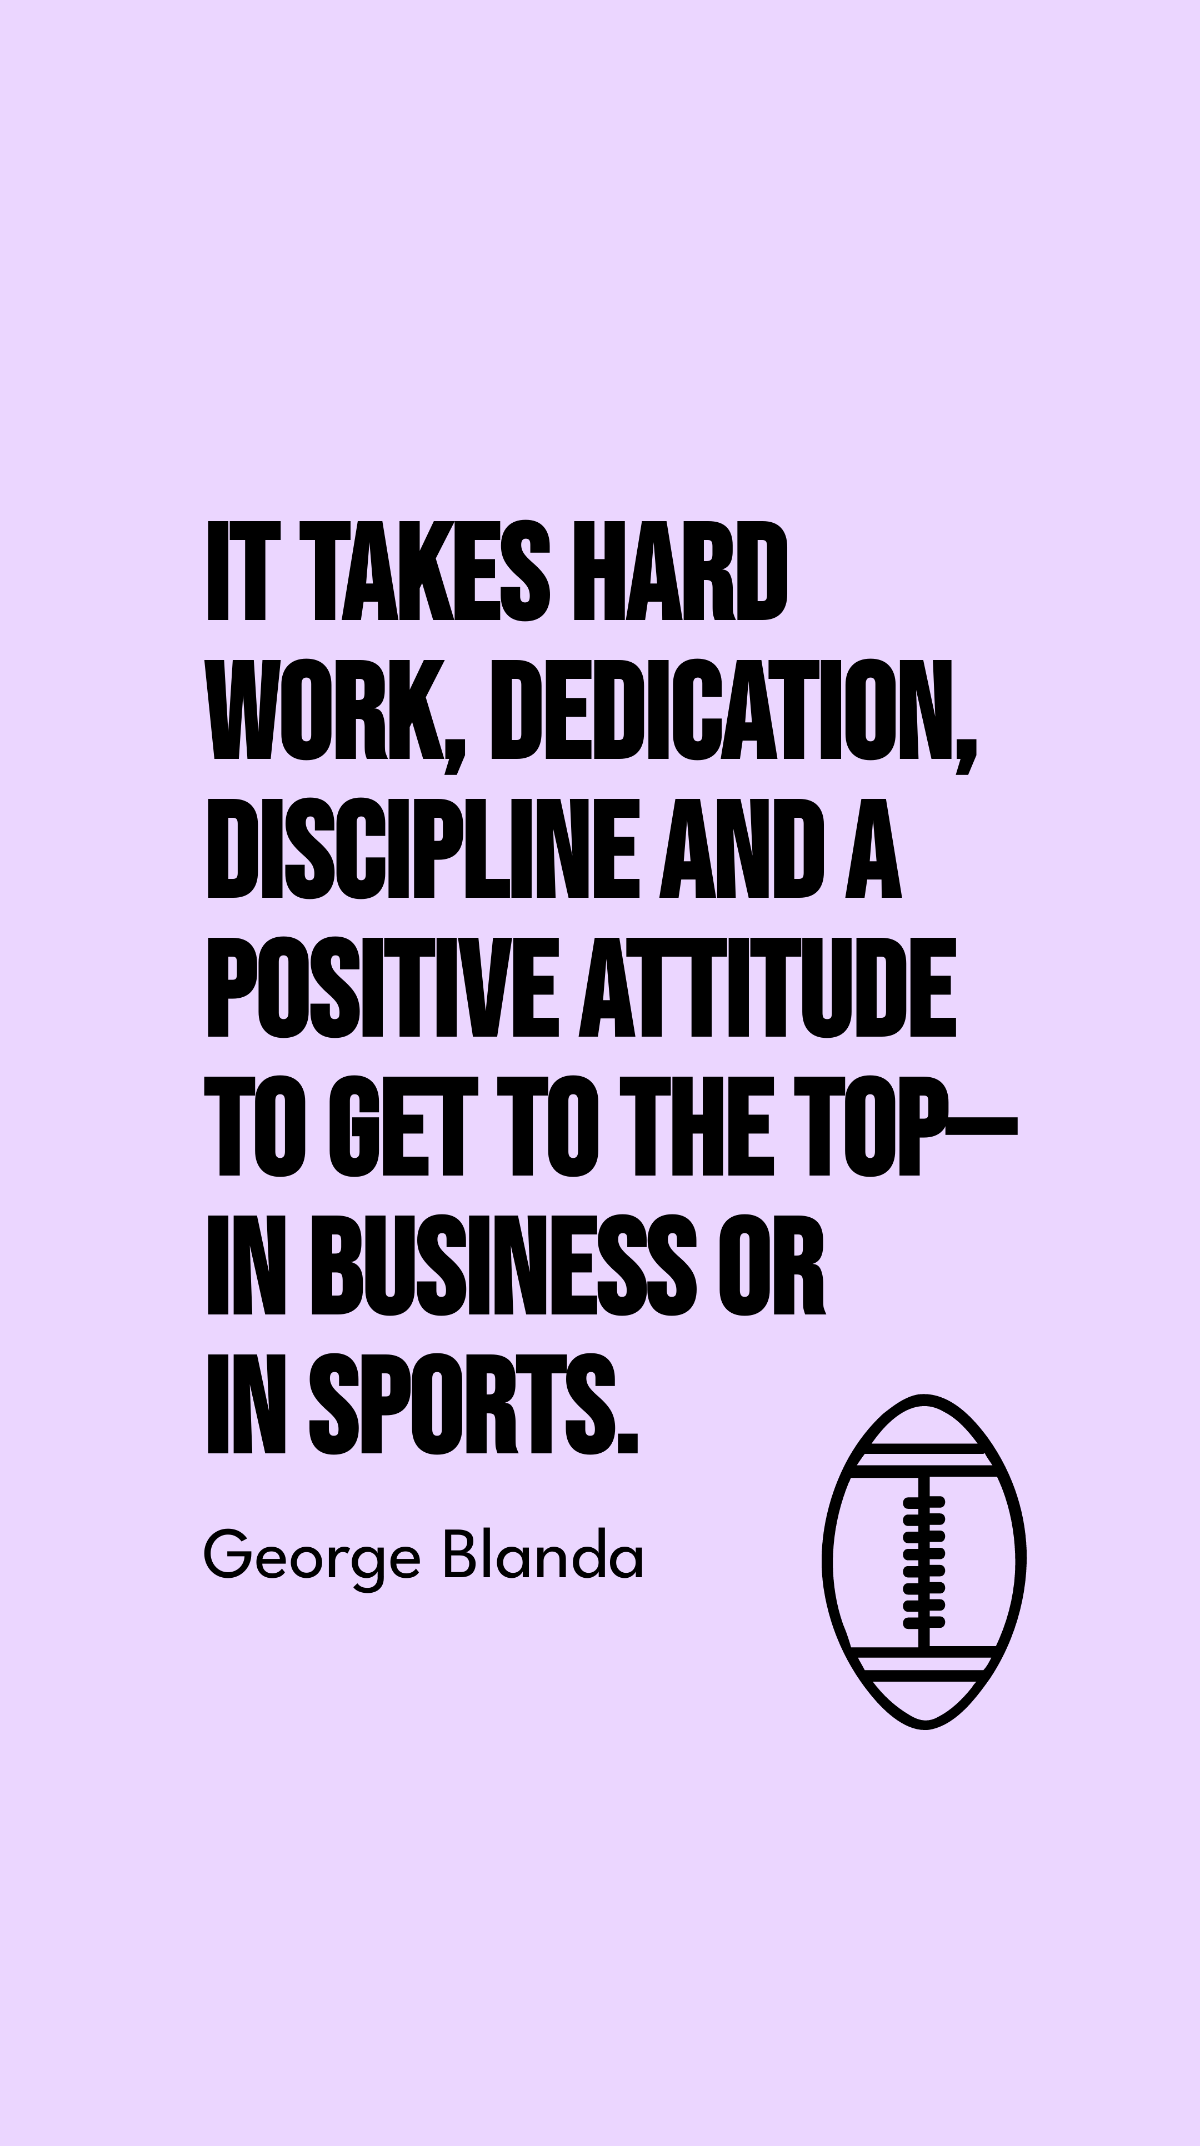 Free George Blanda - It takes hard work, dedication, discipline and a positive attitude to get to the top - in business or in sports. Template